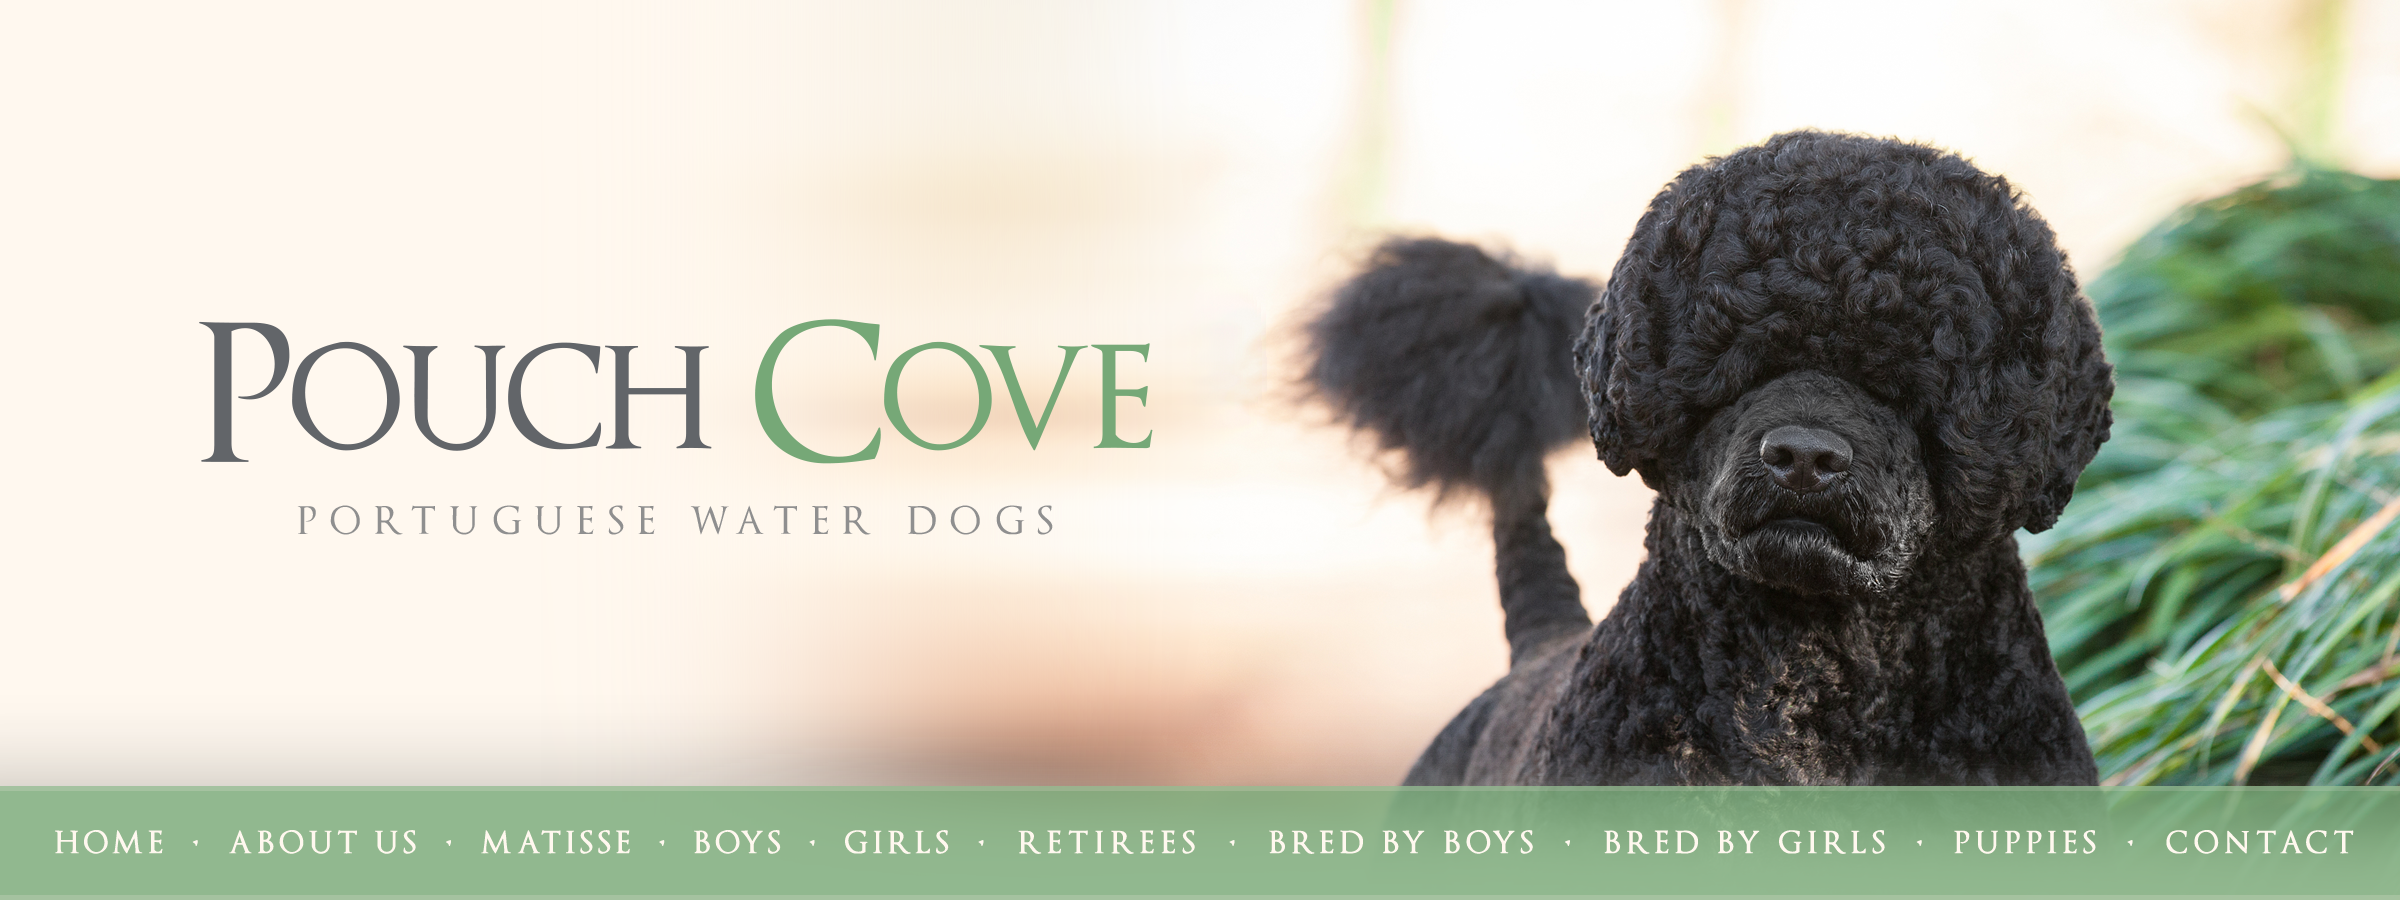 Pouch Cove Portuguese Water Dogs • Welcome